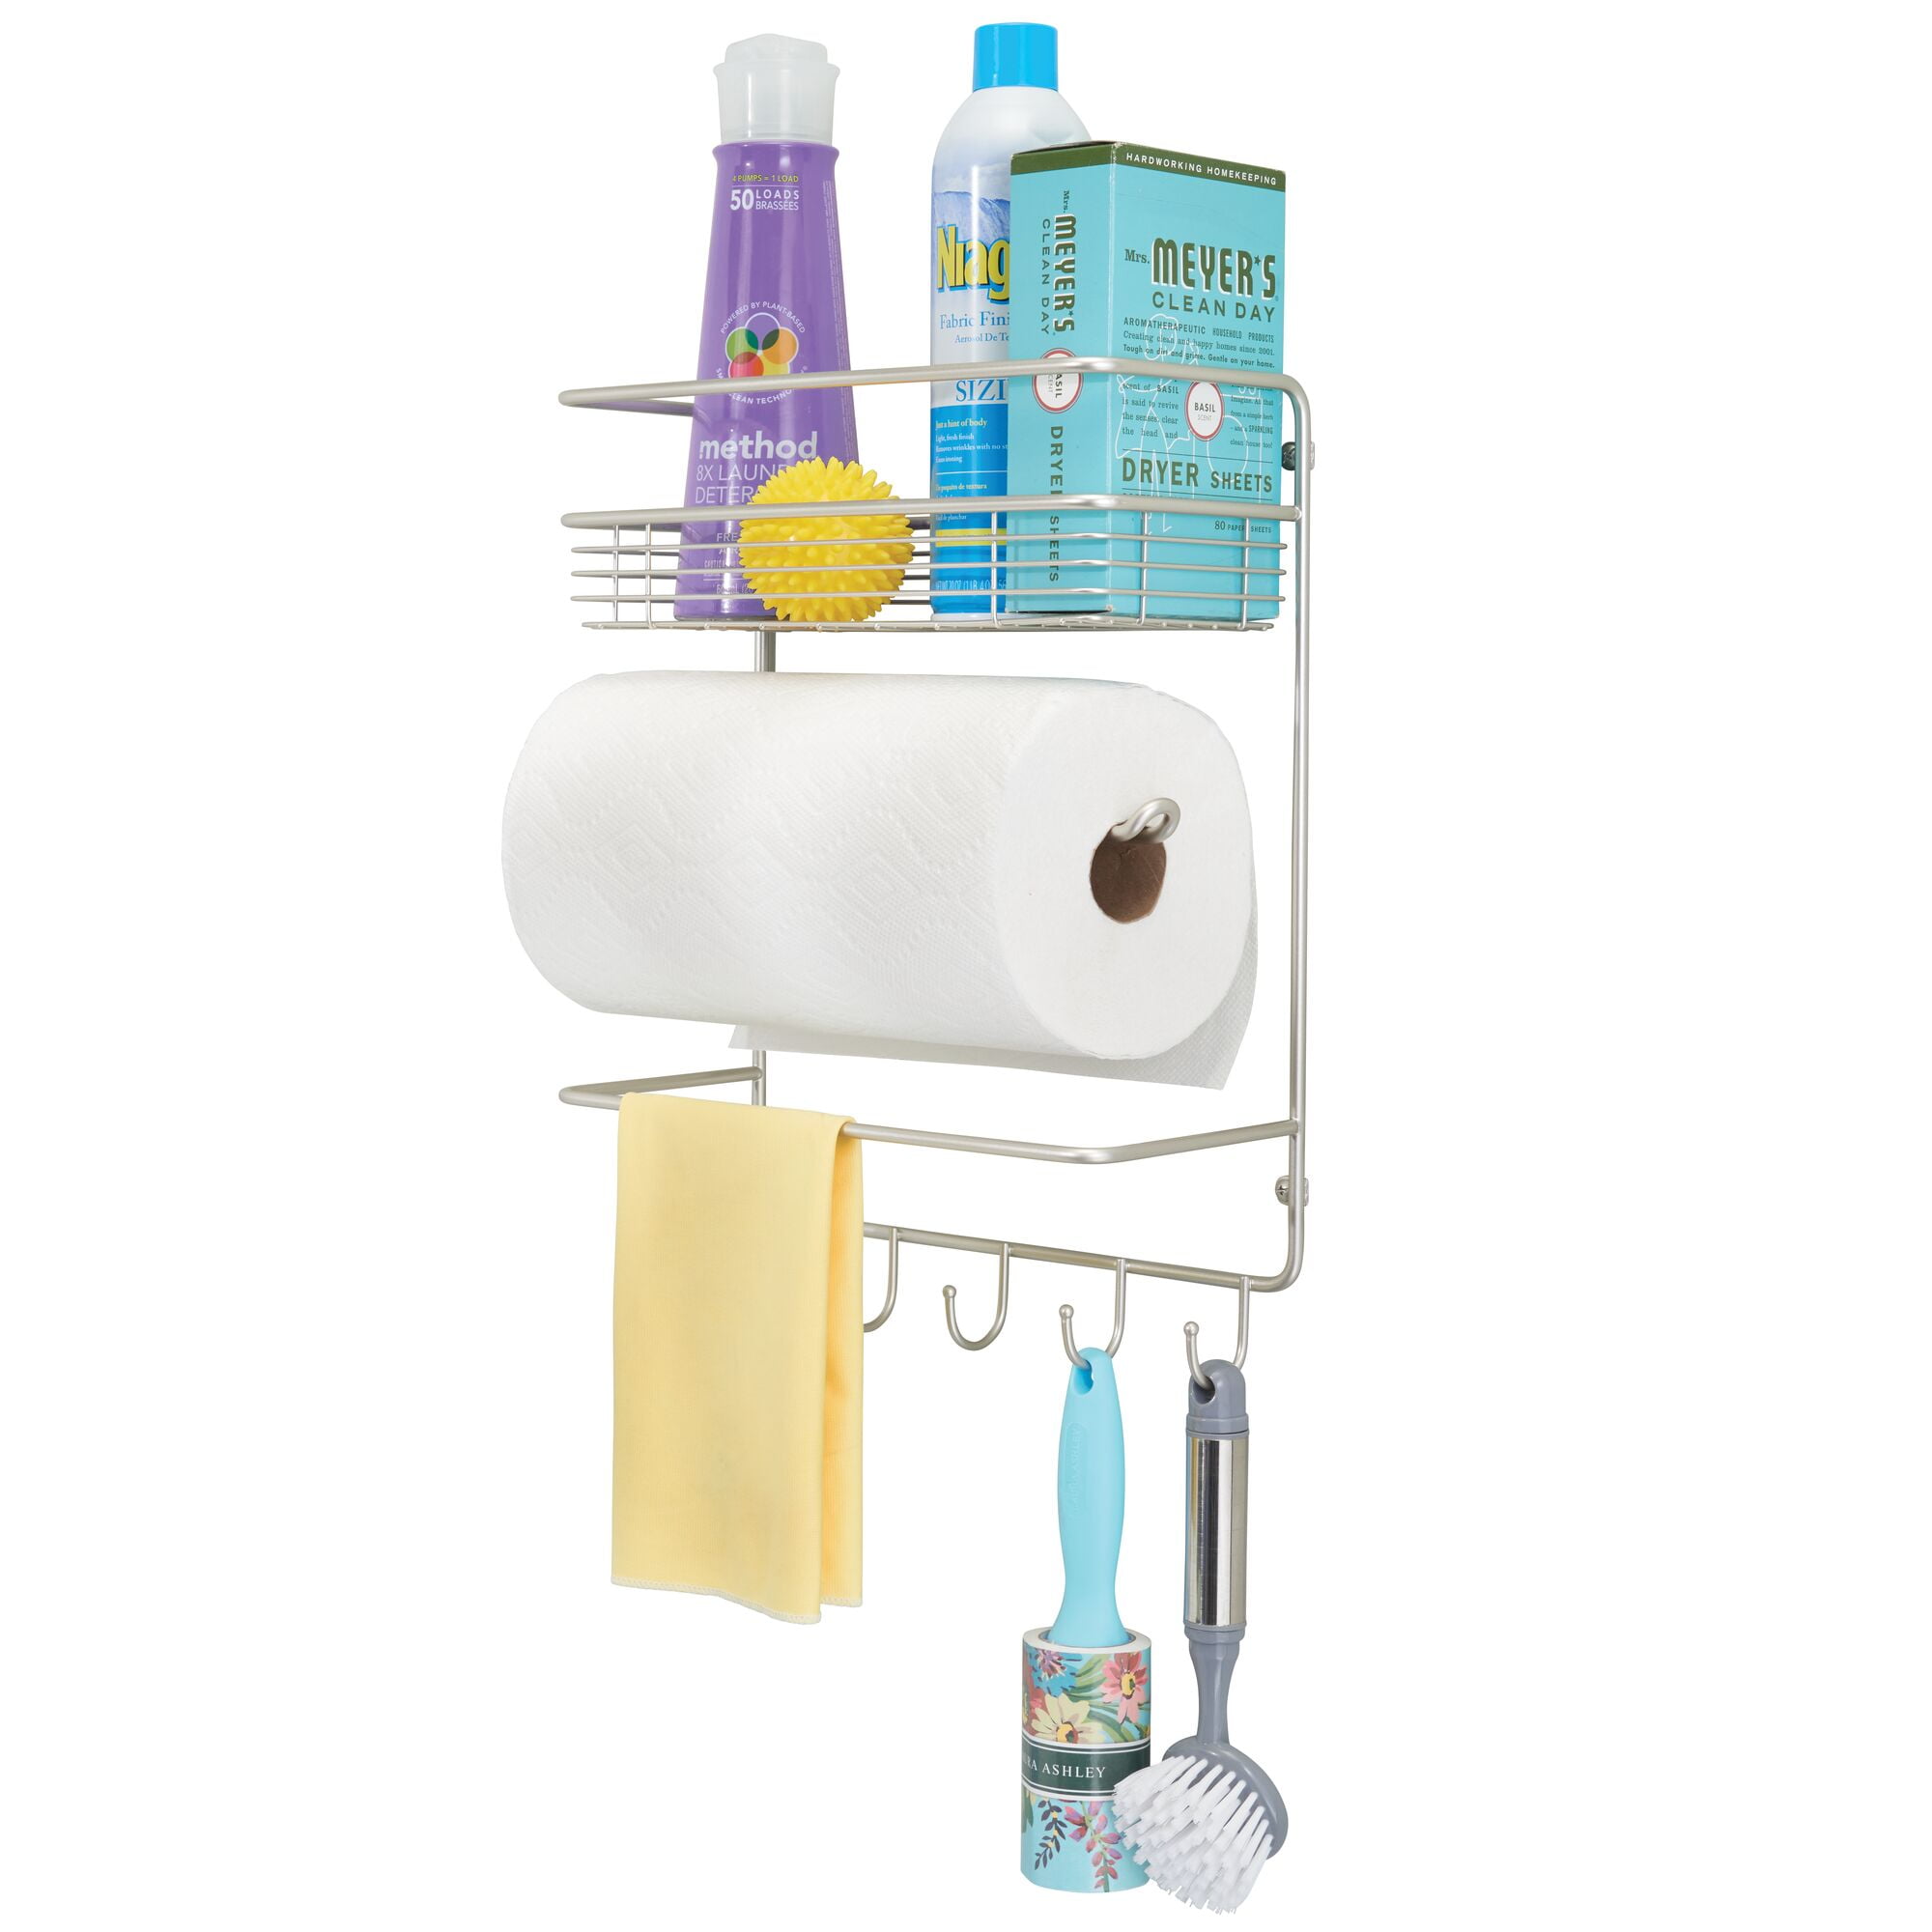 Wall Mounted Paper Towel Roll Holder with Storage Shelves – All